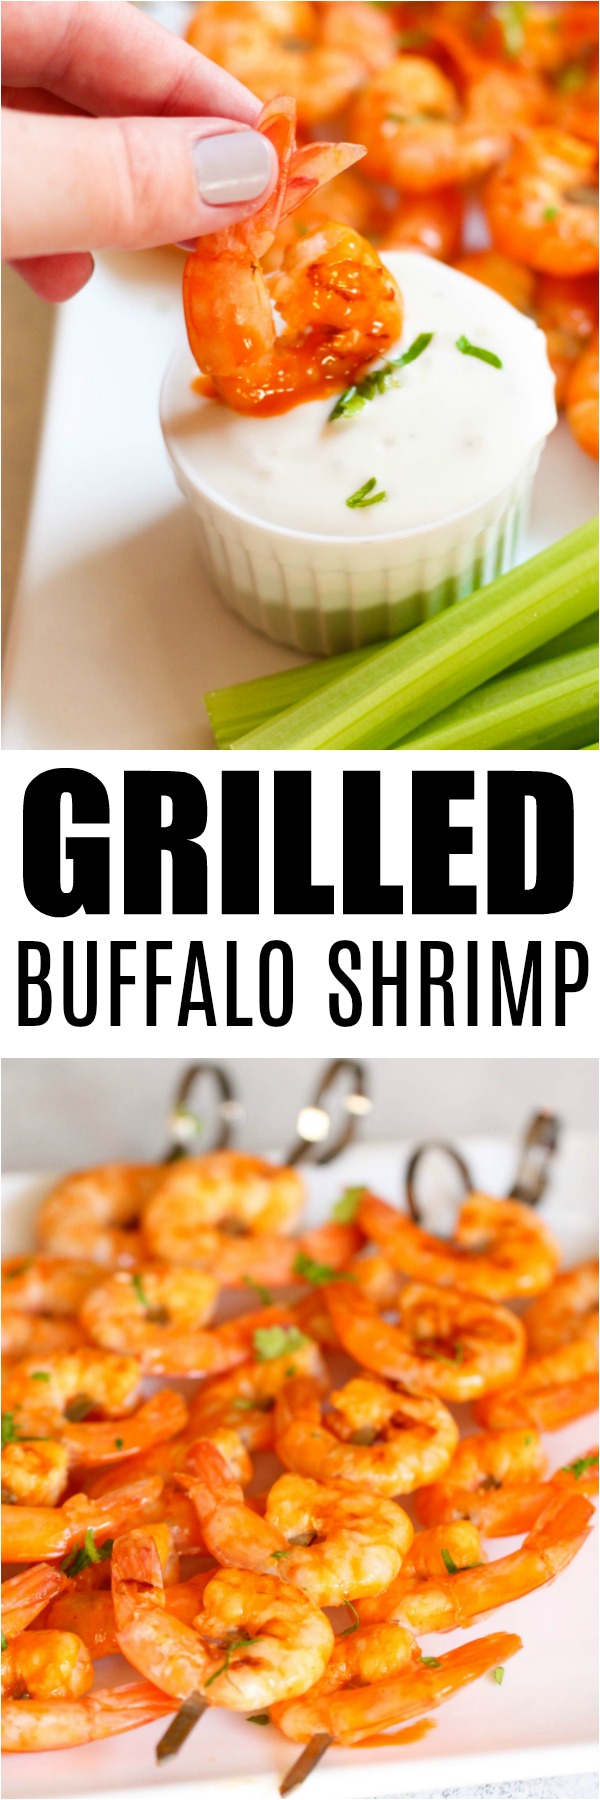 Grilled Buffalo Shrimp on a serving plate